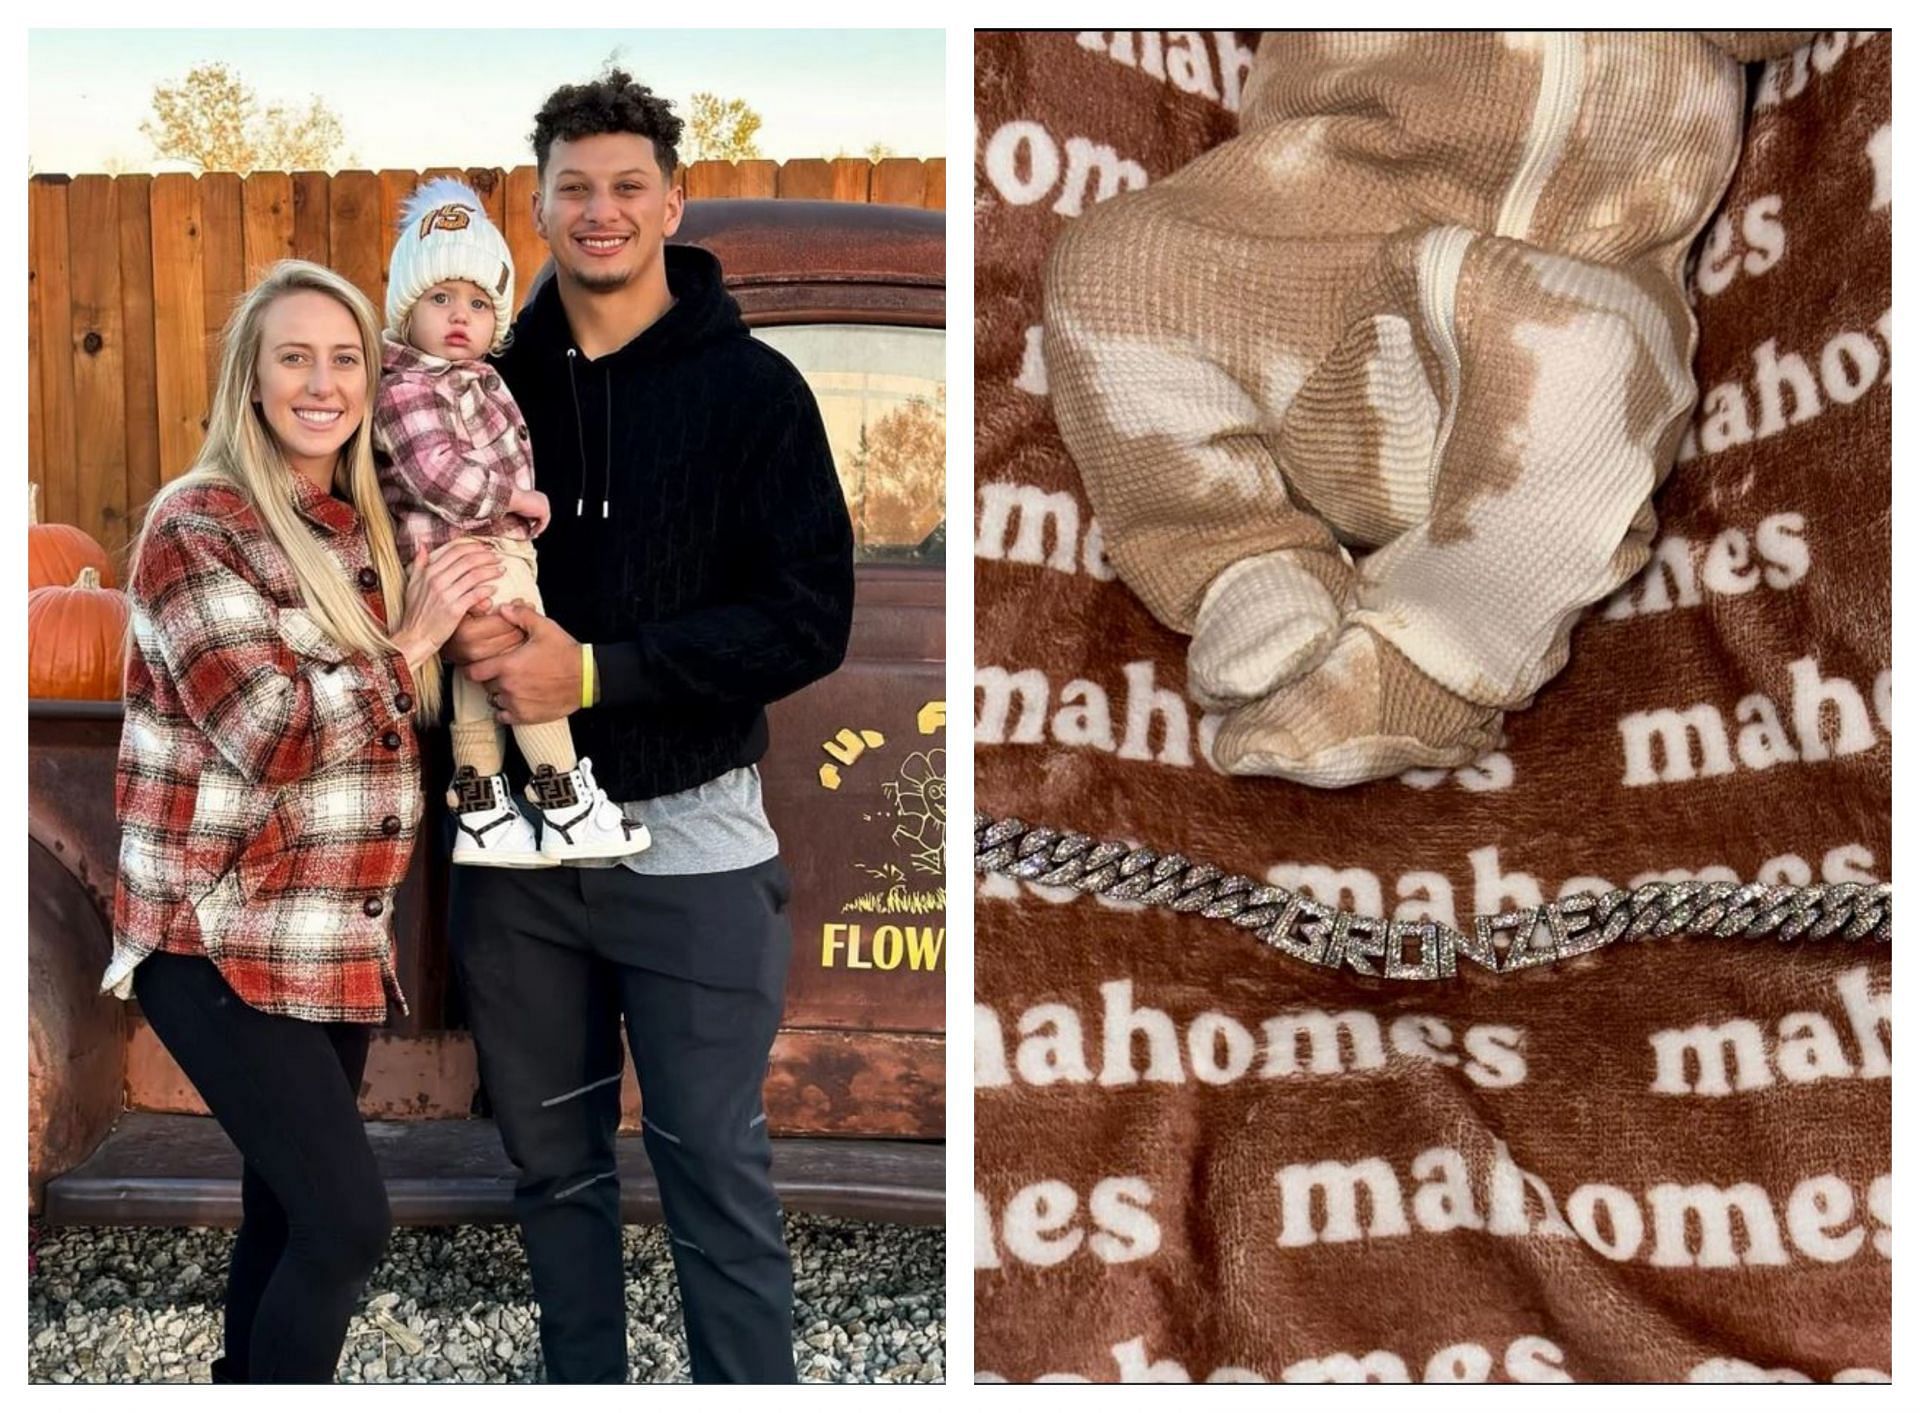 Brittany Mahomes sparks intrigue with her choice of outfit for  Chiefs-Vikings fixture